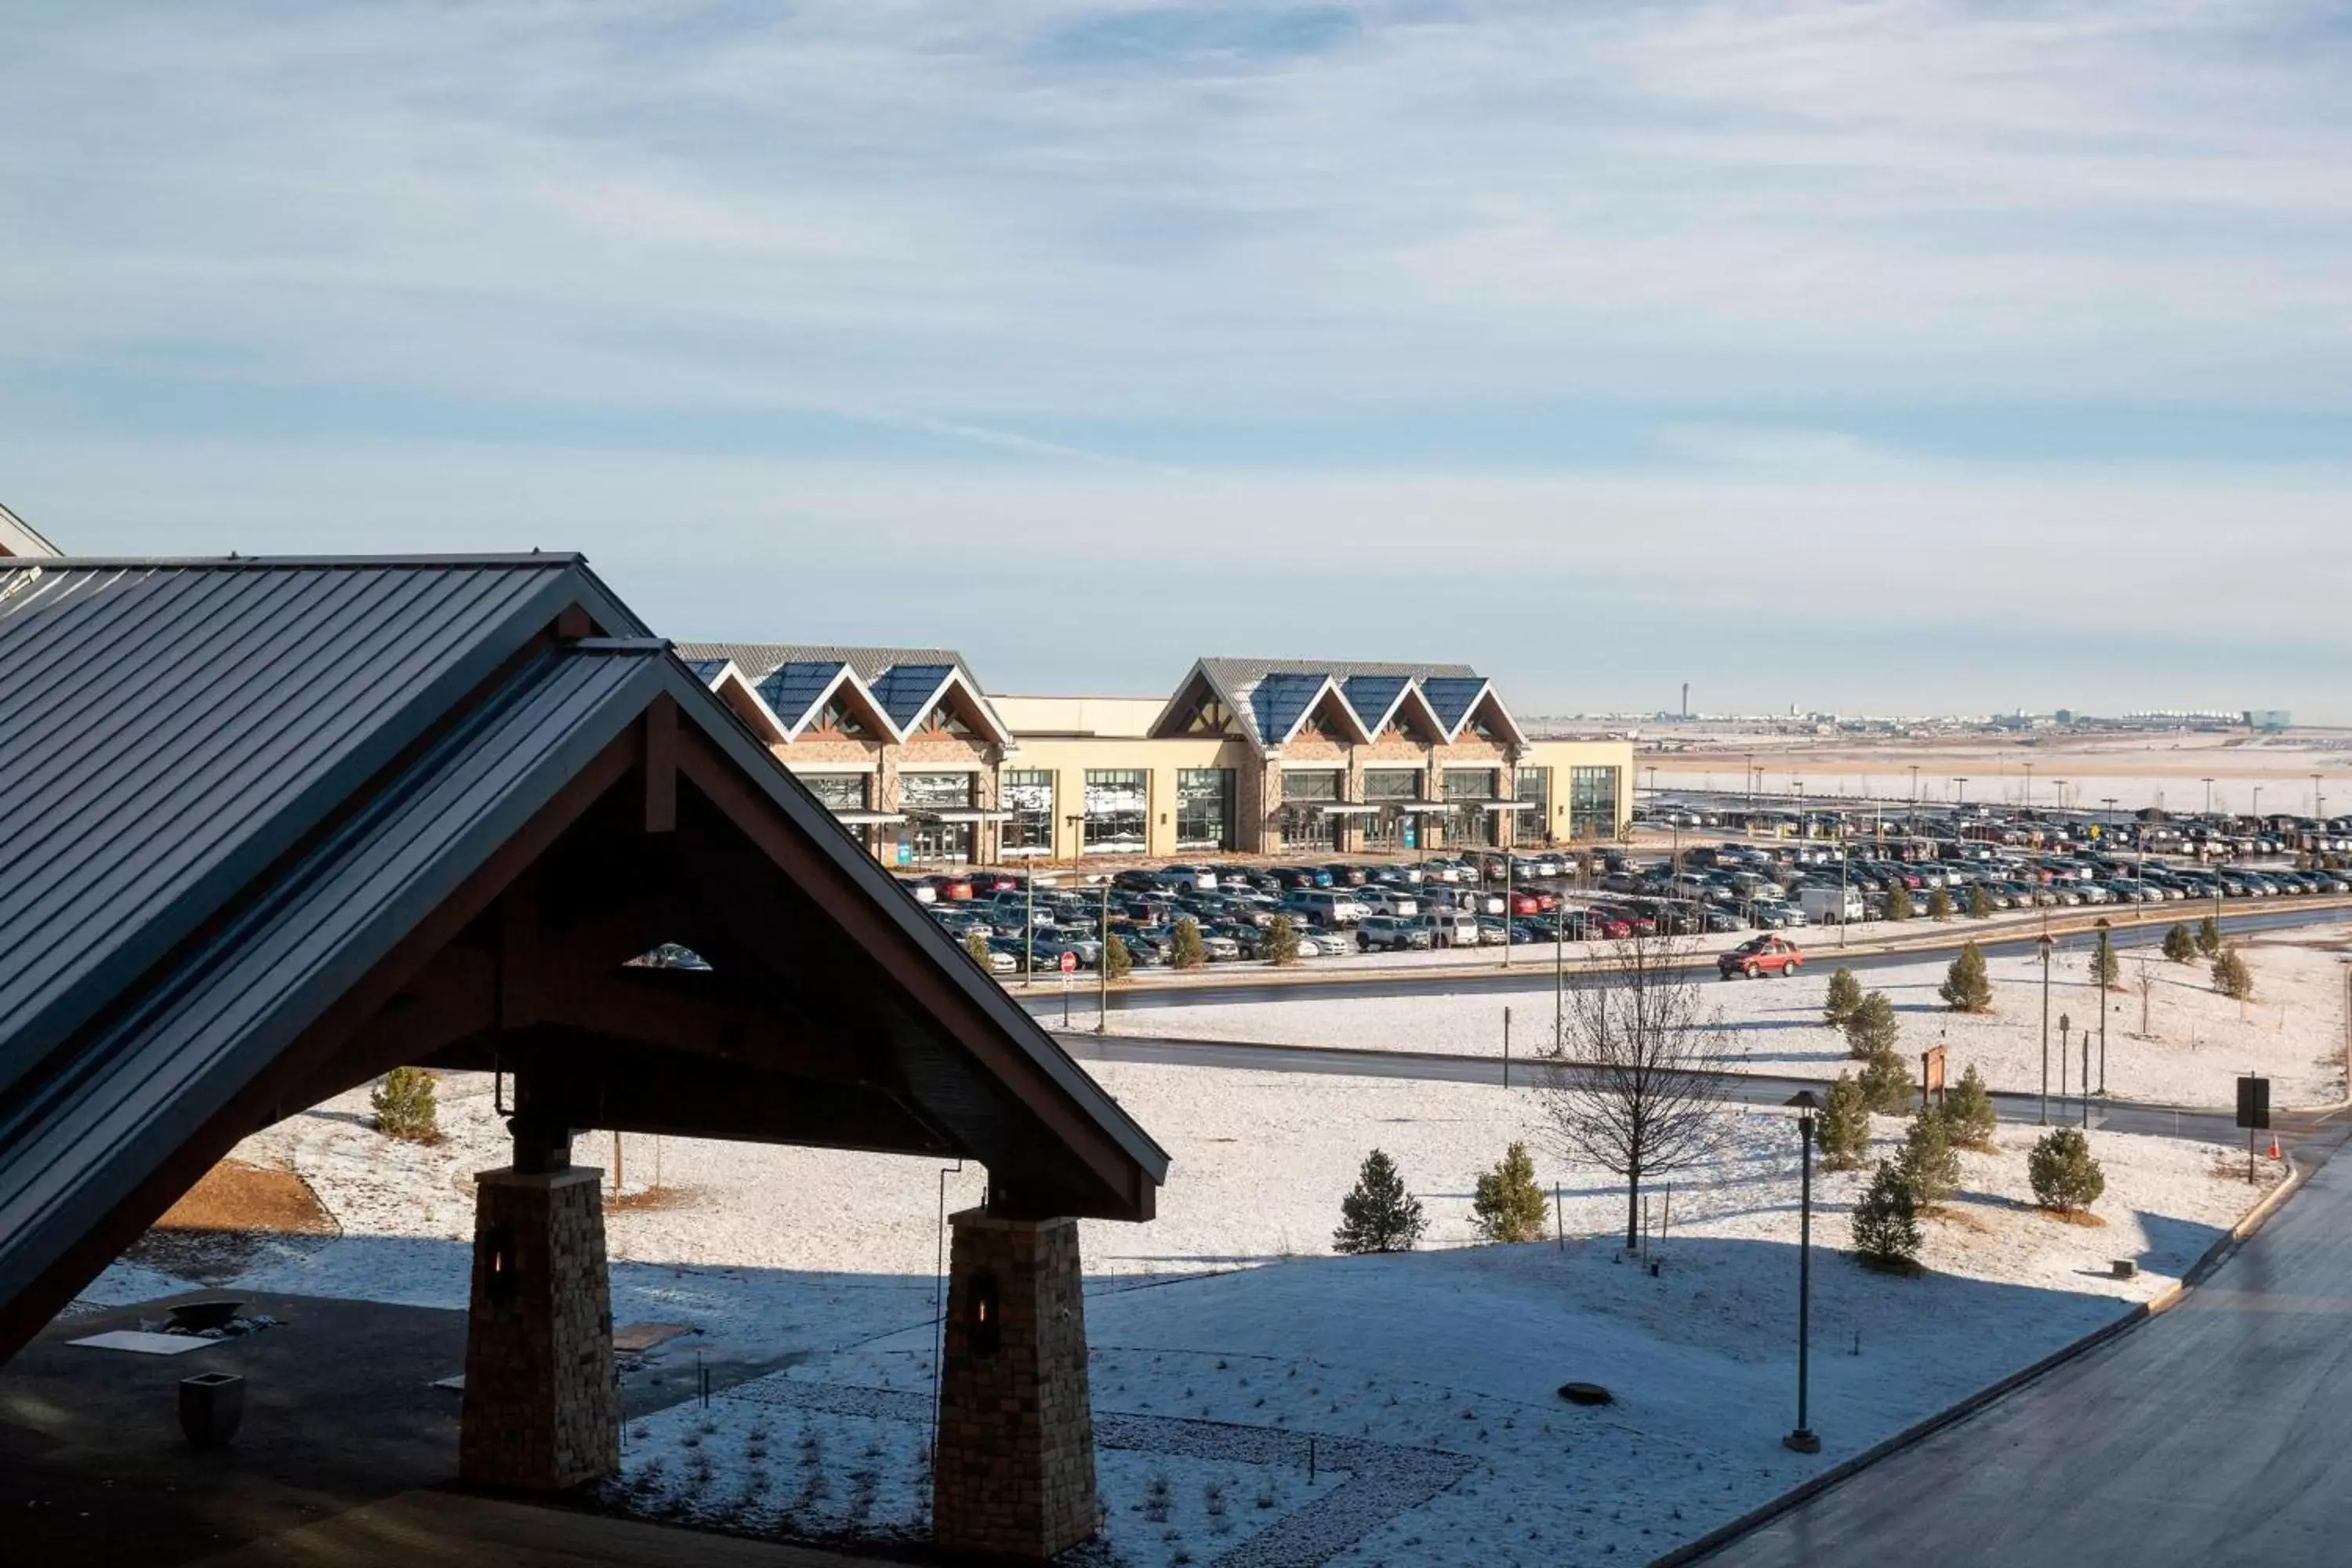 Property building in Gaylord Rockies Resort & Convention Center